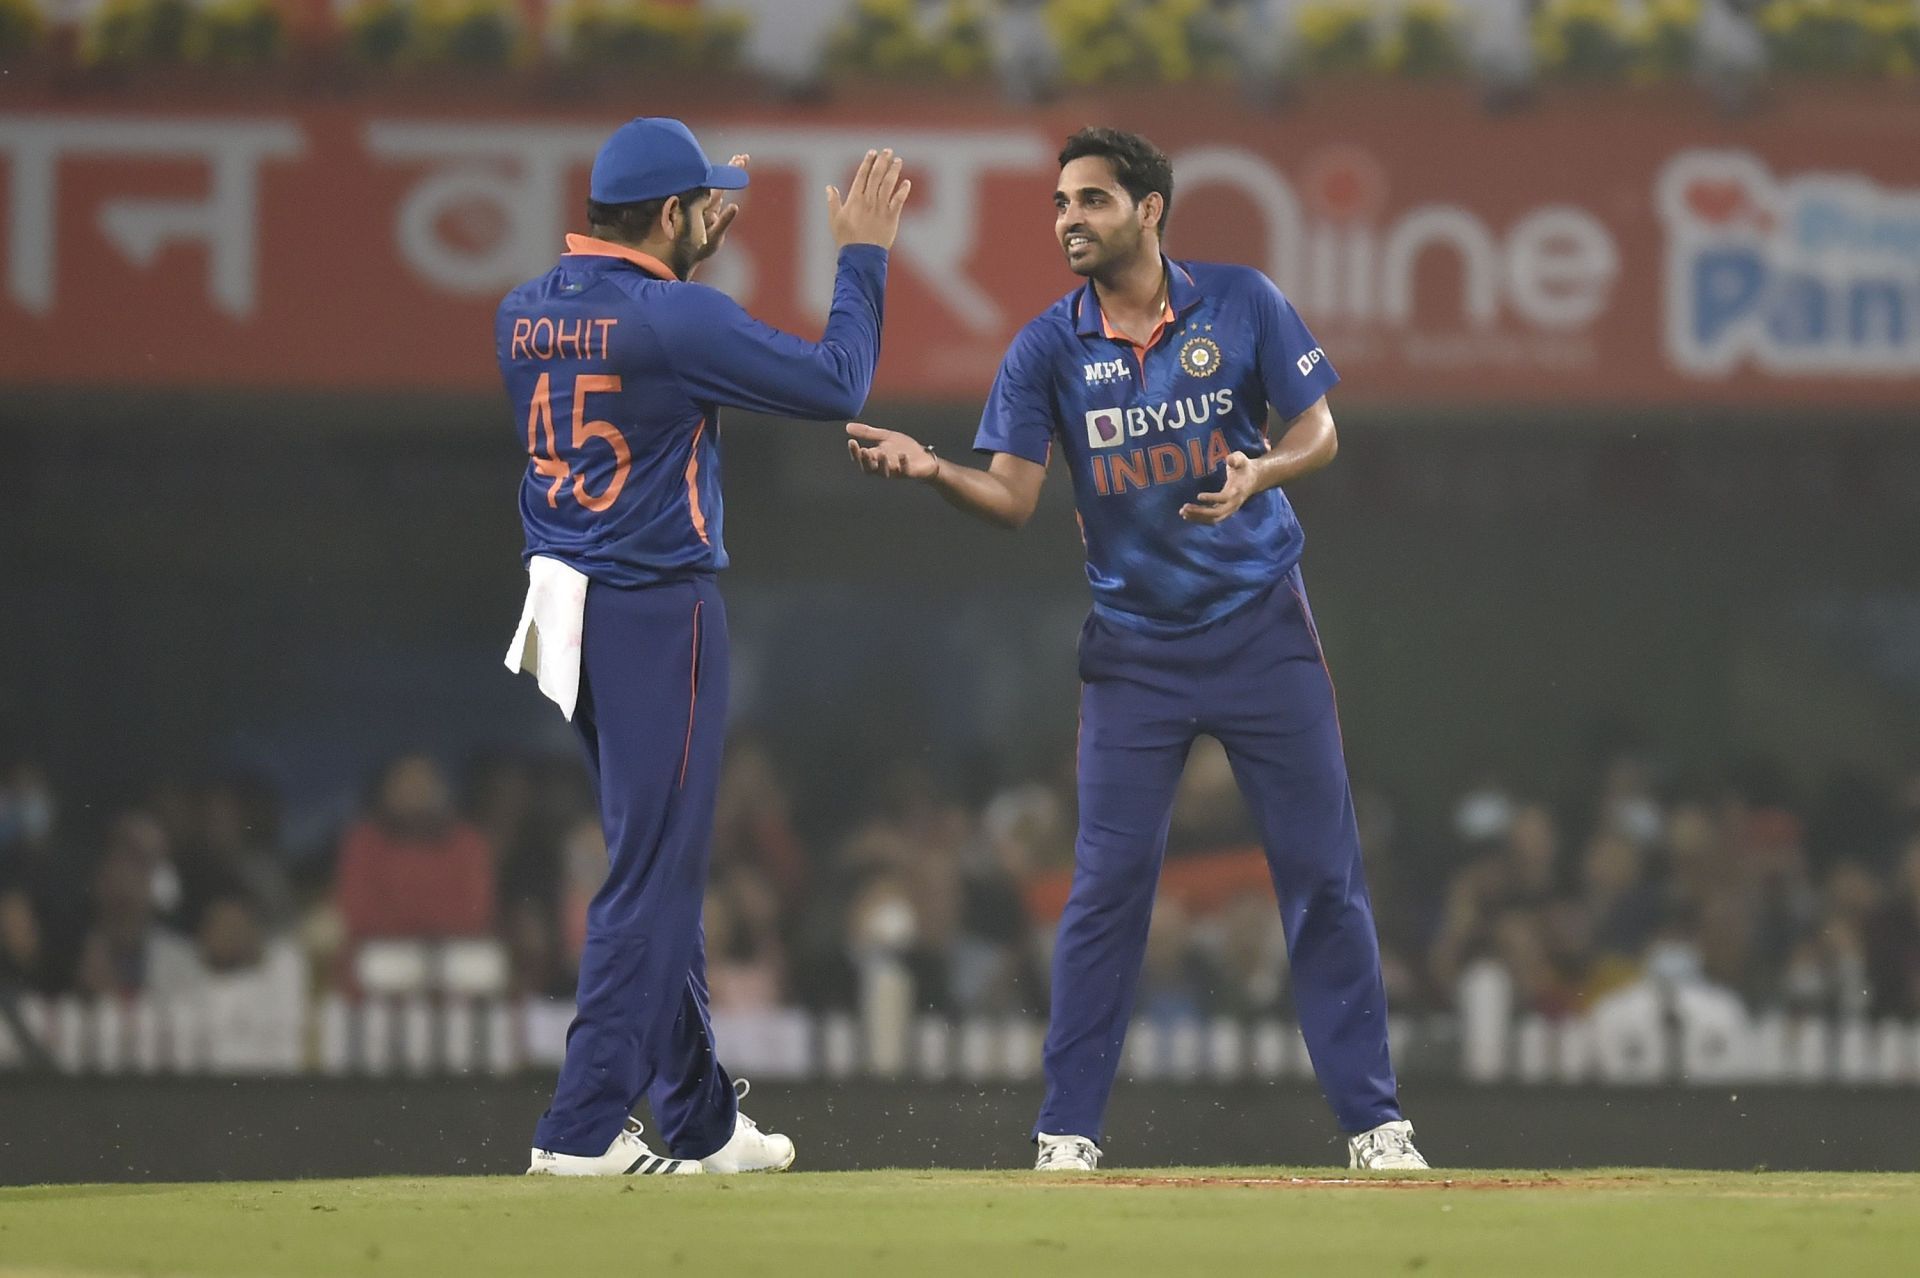 Bhuvneshwar Kumar snared a couple of early wickets in the first T20I against Sri Lanka